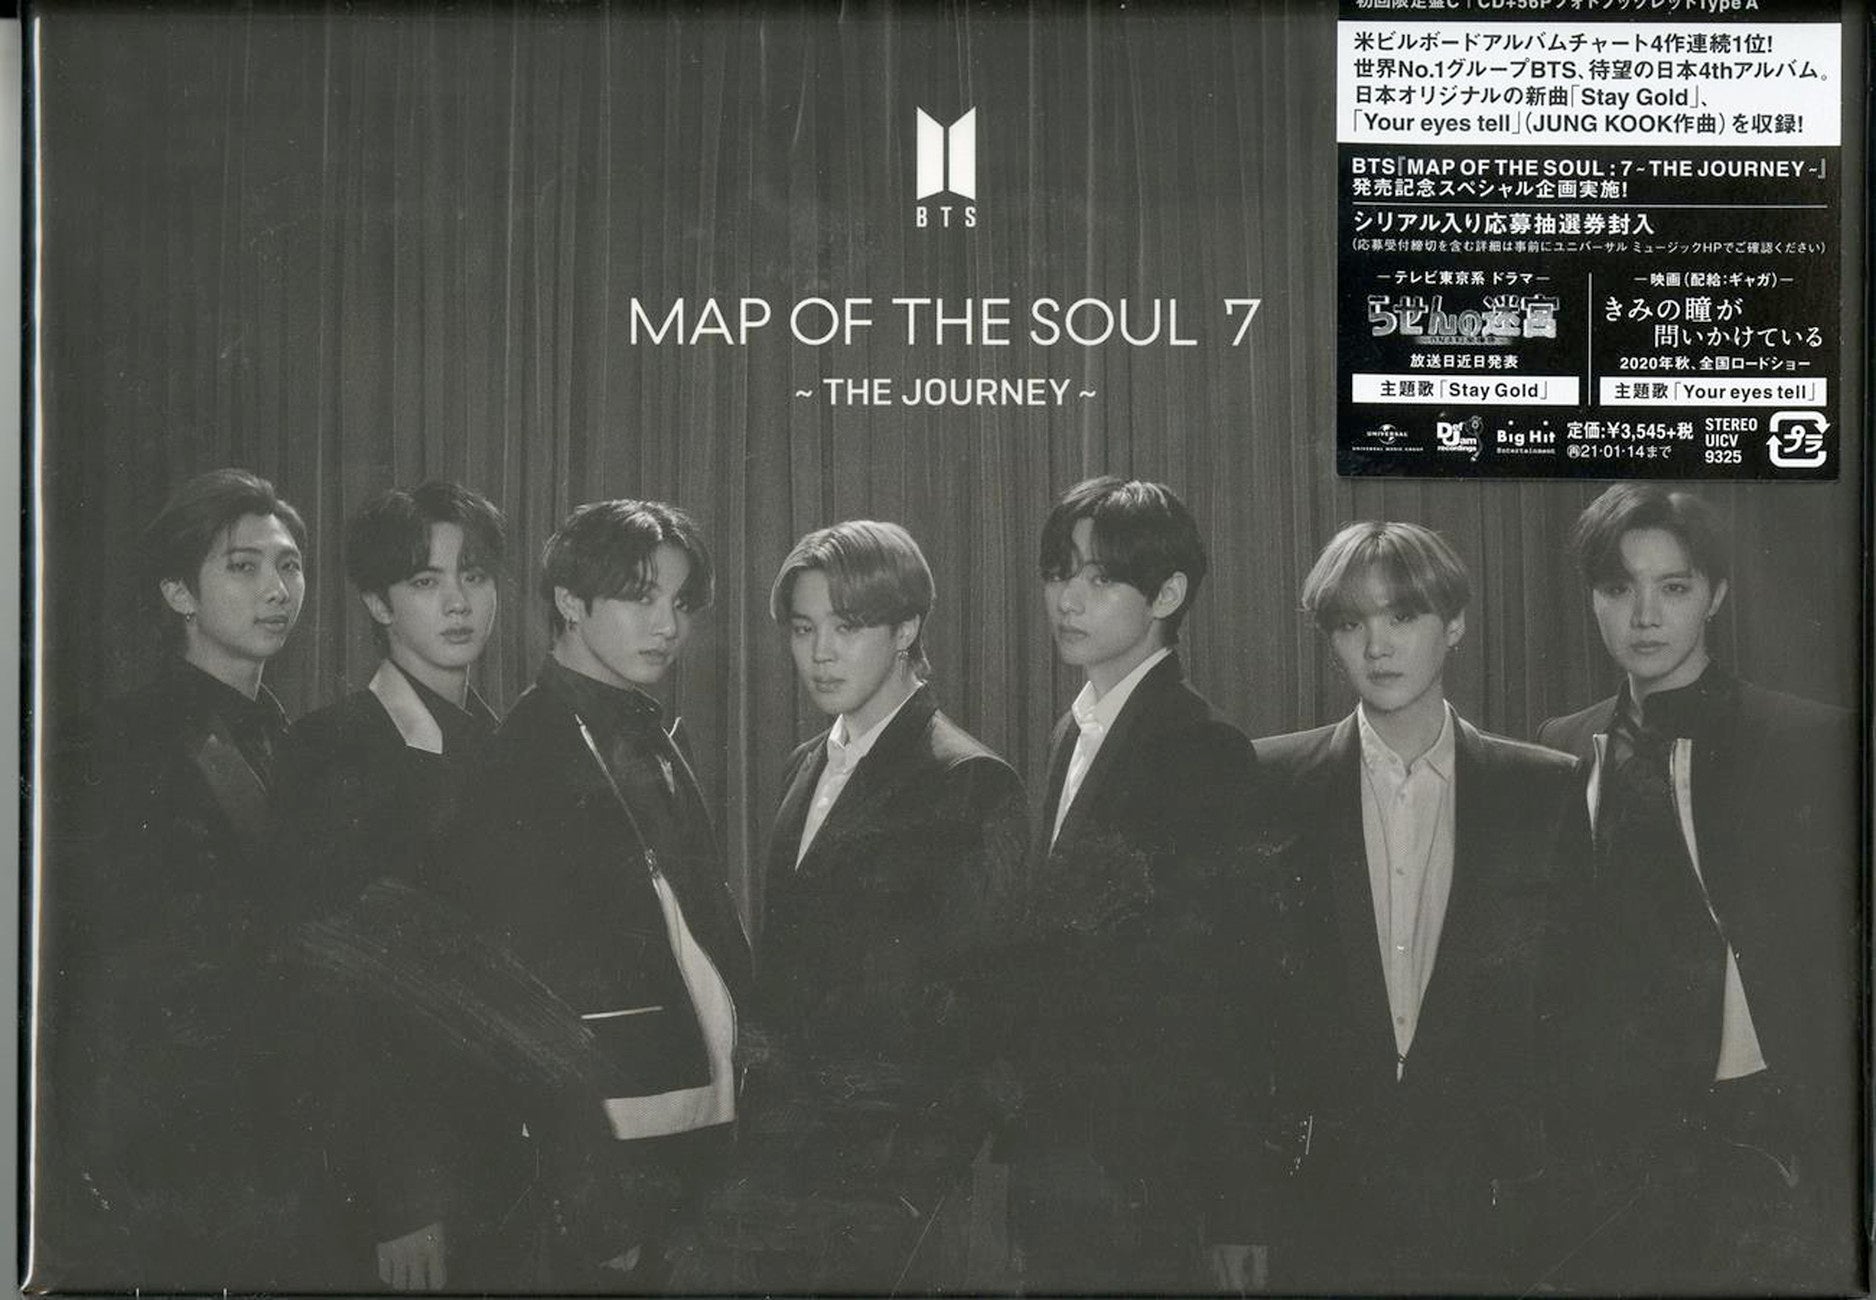 Bts - Map Of The Soul : 7 The Journey (Type-C) - Japan CD+Book